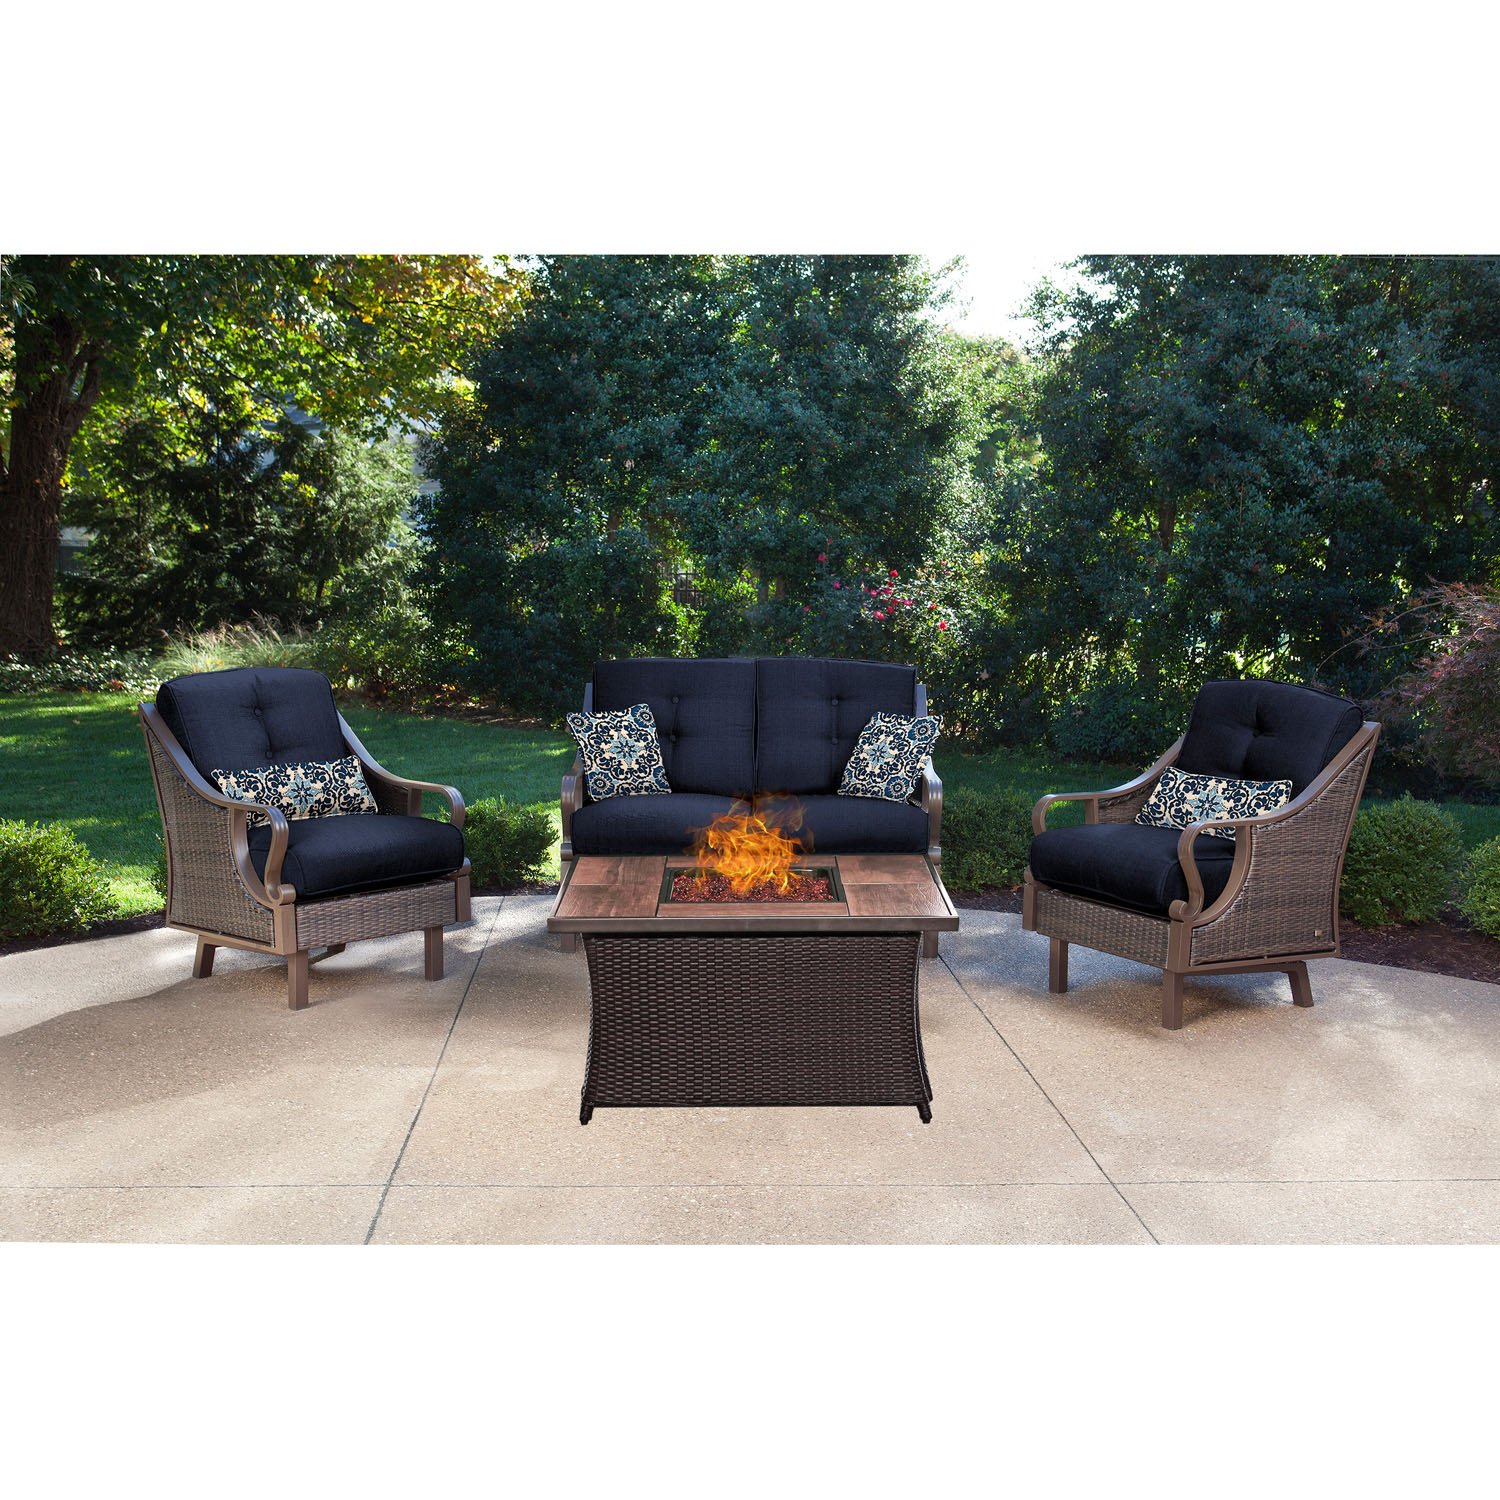 Hanover Ventura 4 Pcs Wicker and Steel Propane Fire Pit Chat Set, Navy Blue - image 1 of 11